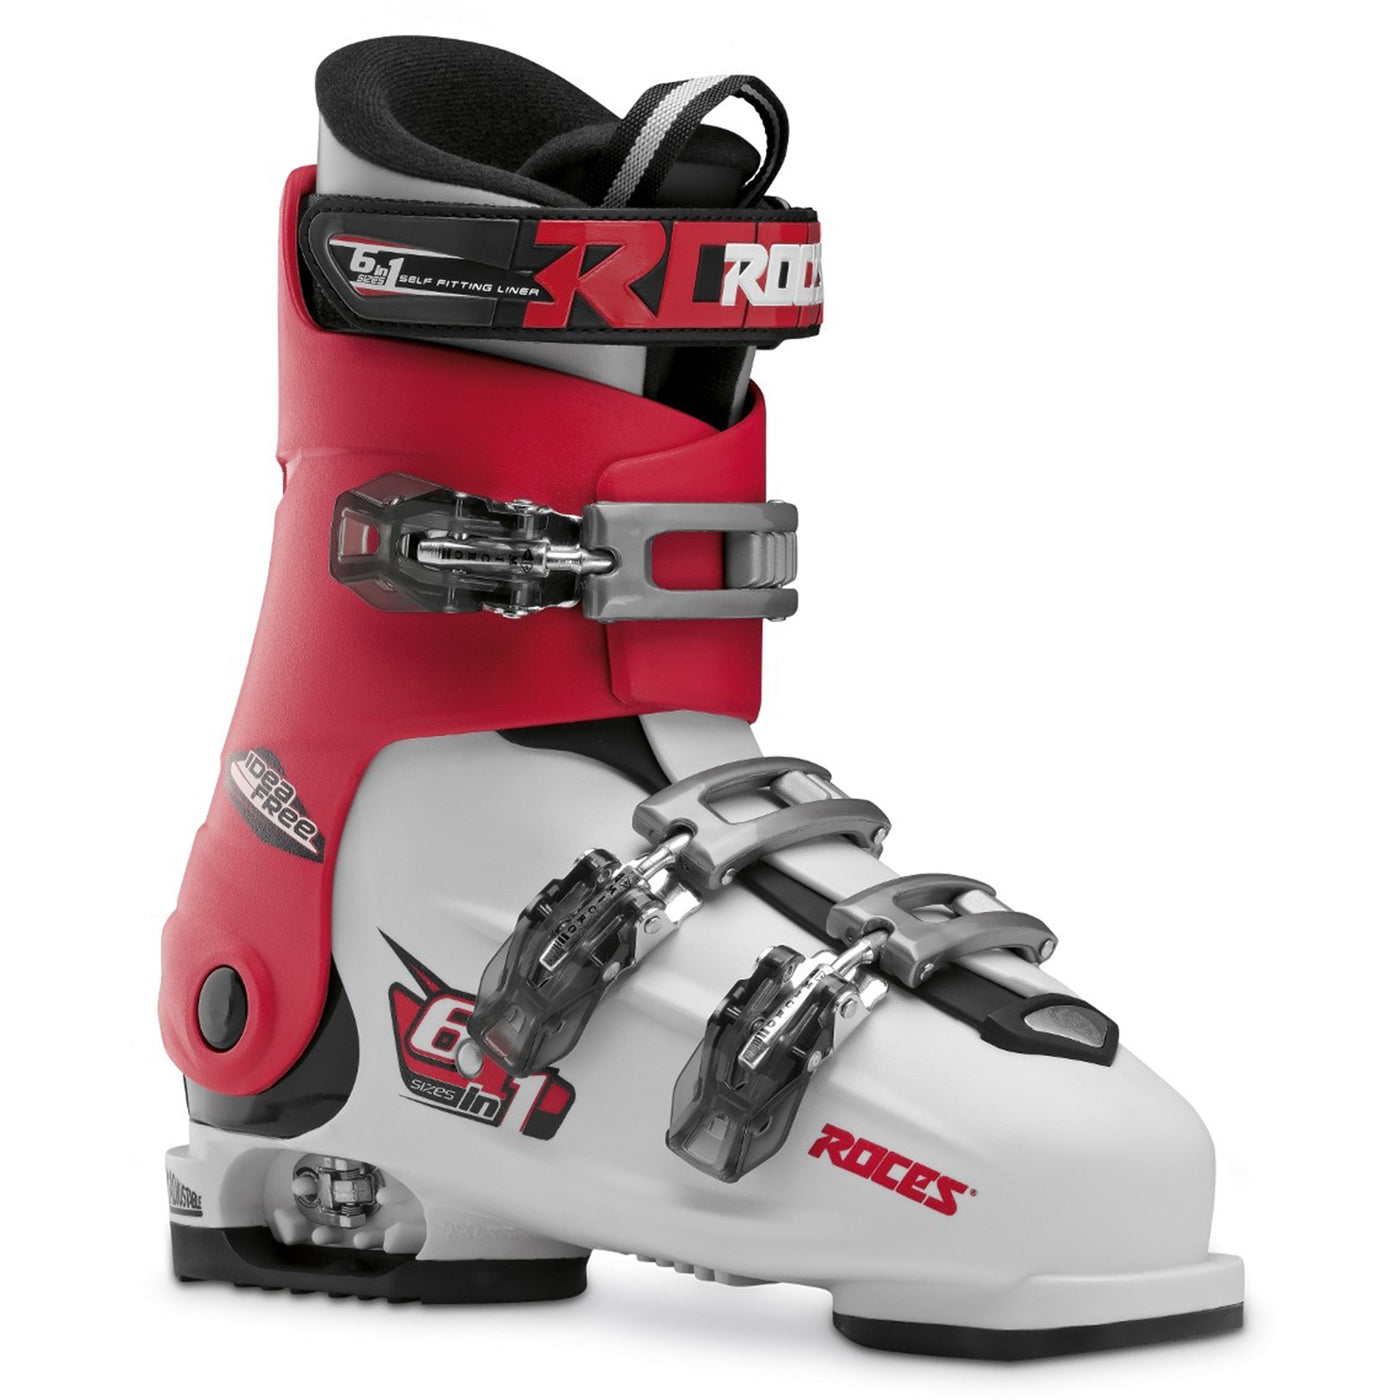 Roces IDEA Free Adjustable Youth Ski Boots | Size 22.5 - 25.5 MP - (Open Box Return) SKI BOOTS Roces White/Red/Black  